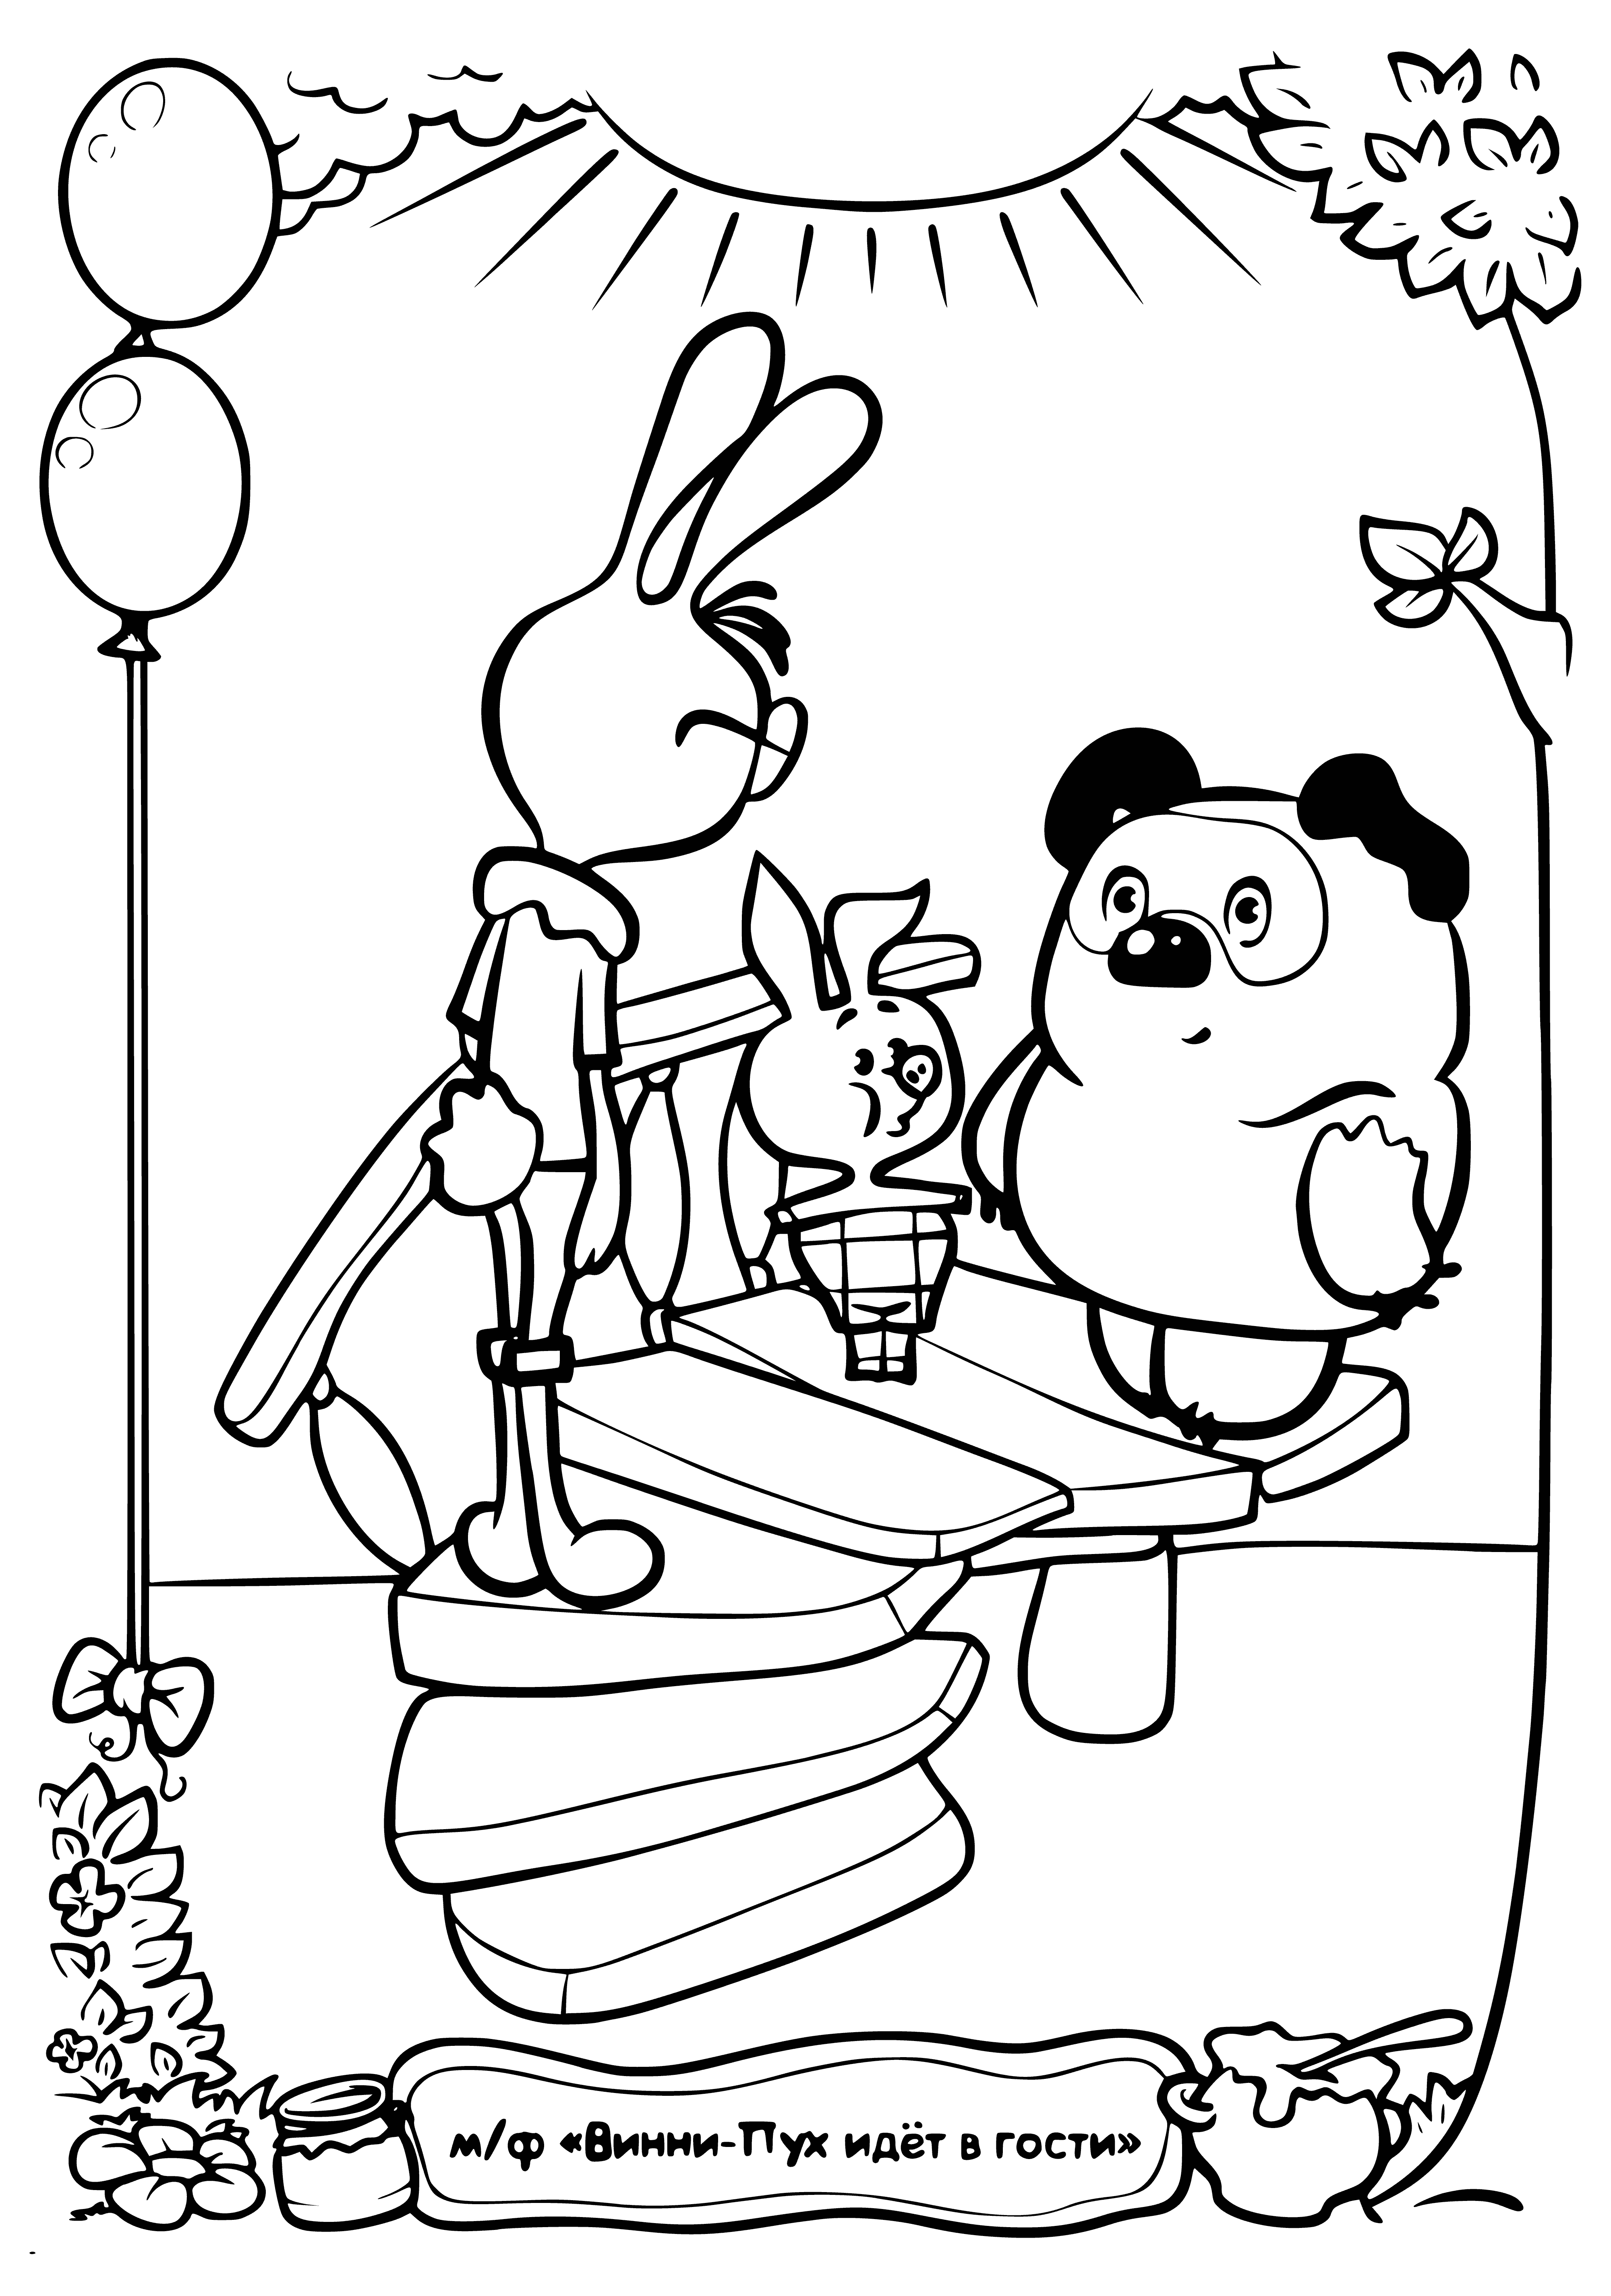 coloring page: Rabbit, Pooh, Tigger, & Eeyore reunite in a field of flowers, each holding something special. Reunited & happy, they share a special moment.